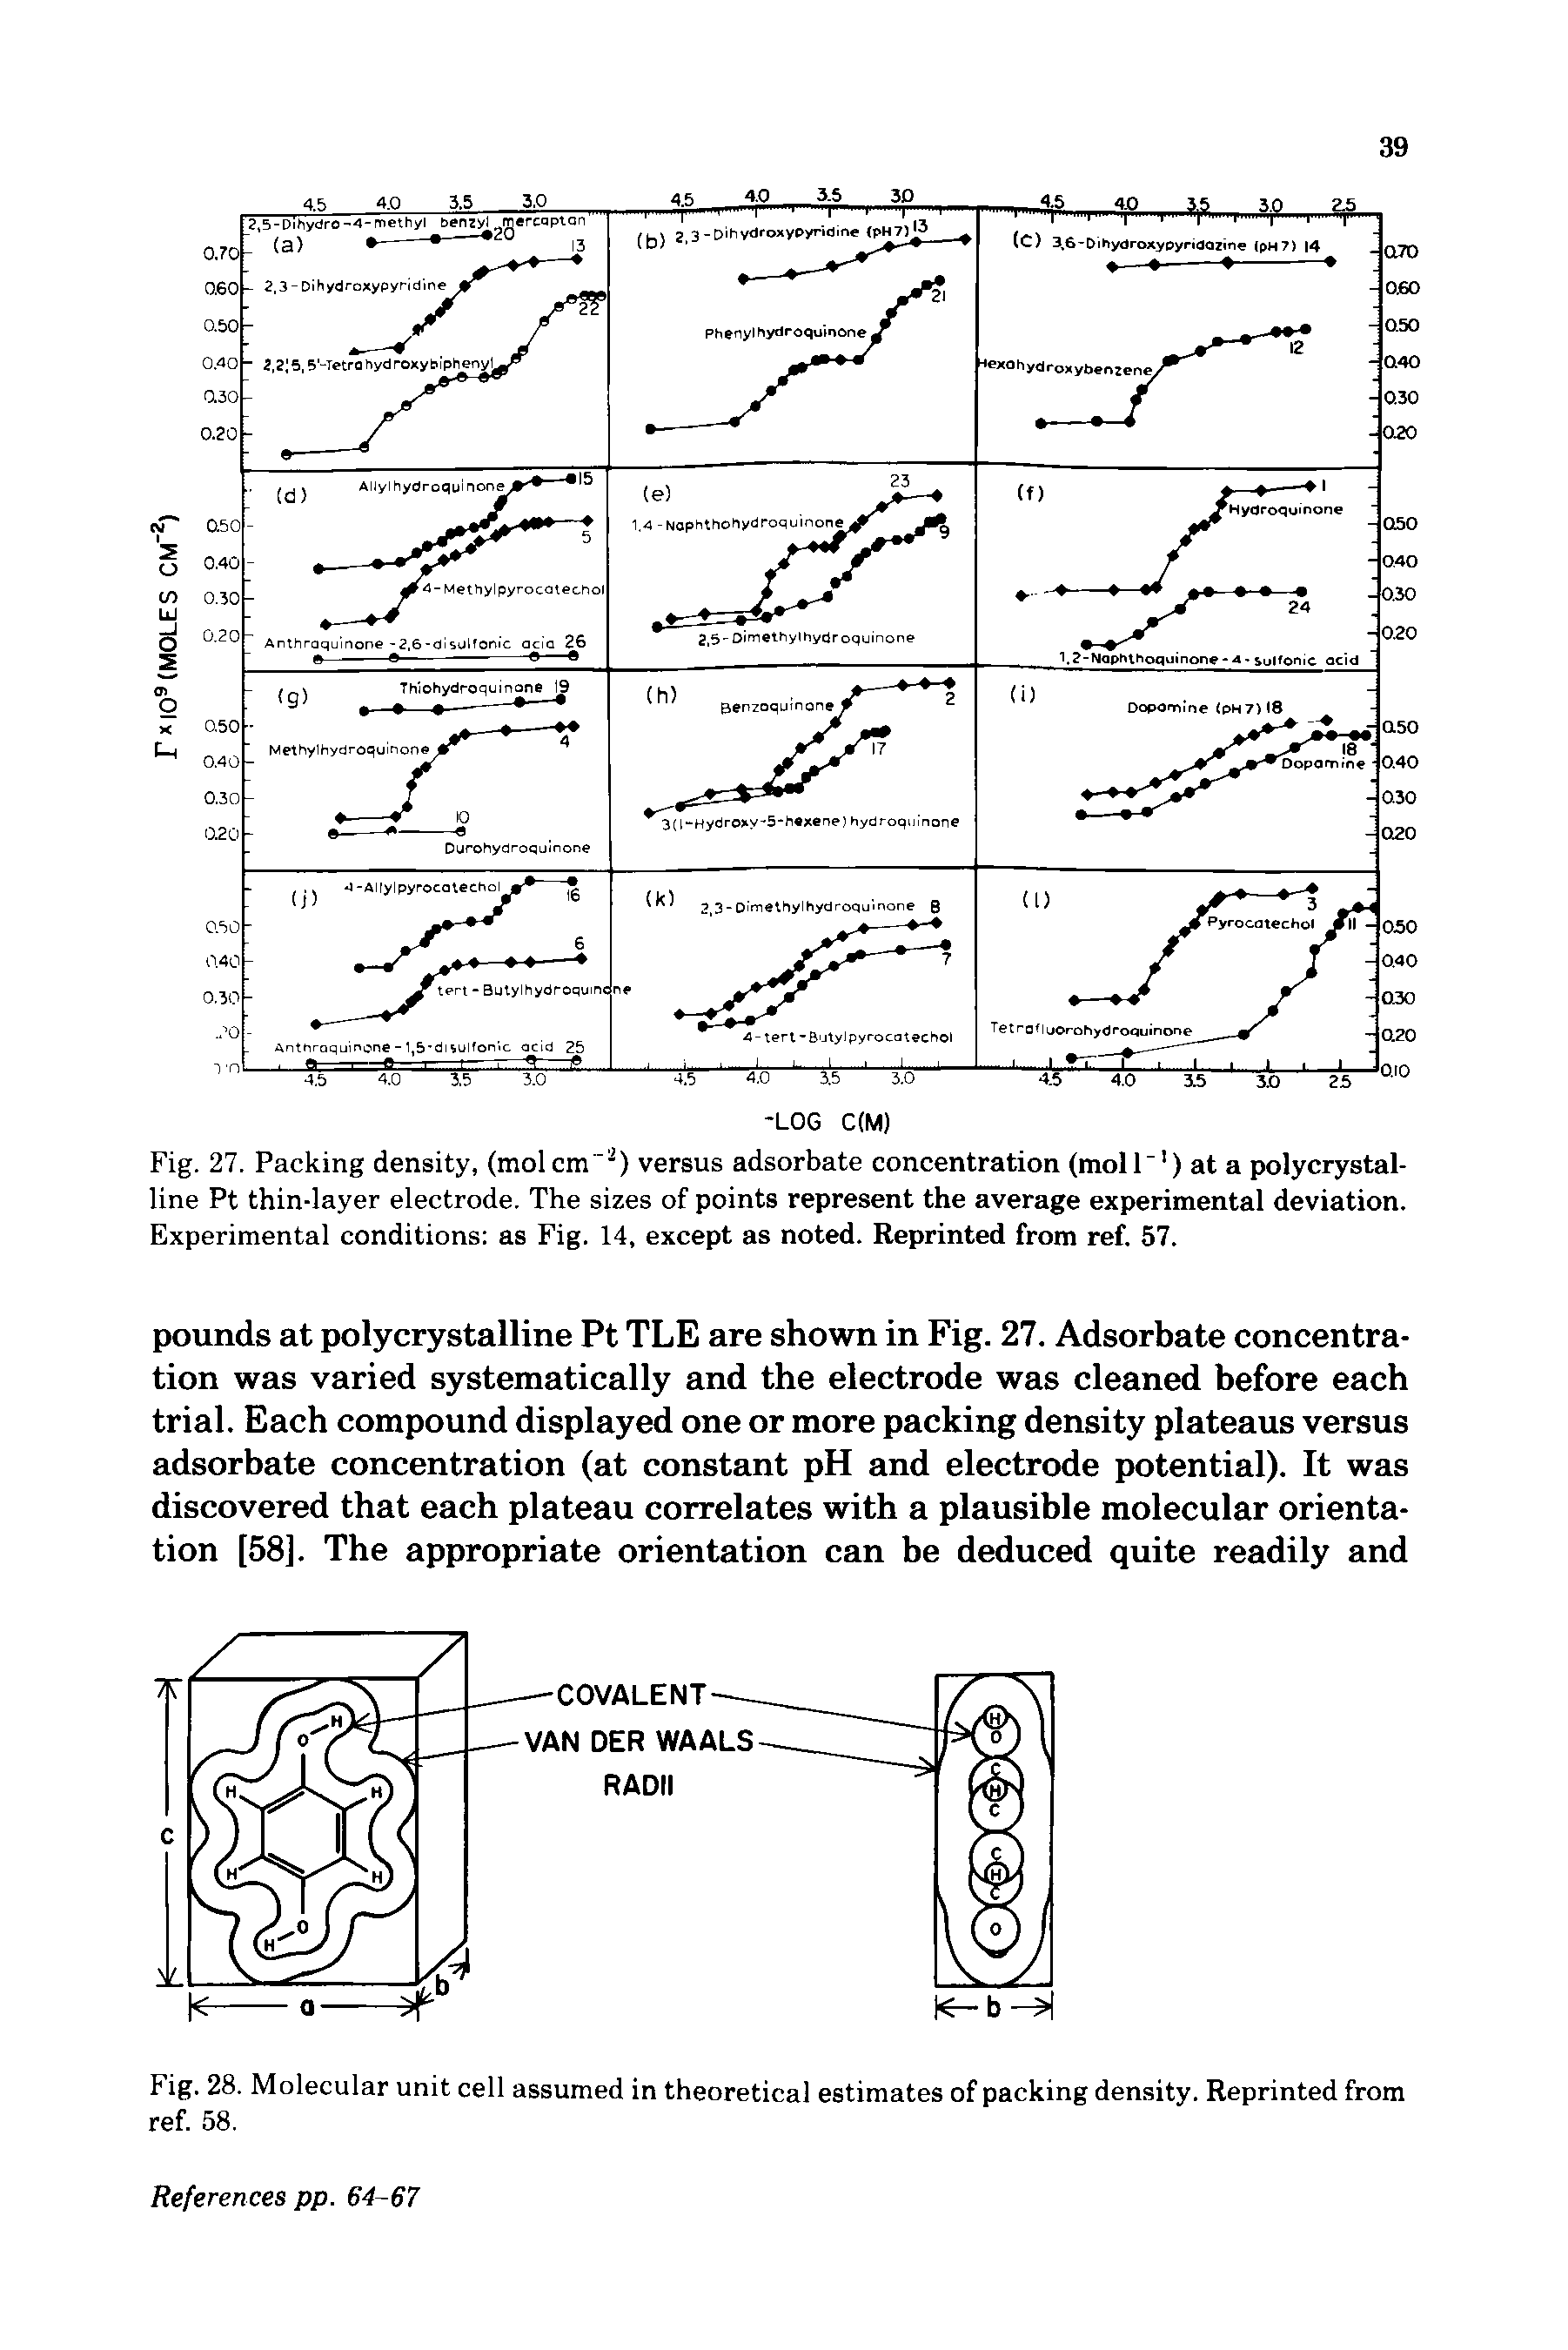 Fig. 27. Packing density, (molcm "2) versus adsorbate concentration (moll-1) at a polycrystalline Pt thin-layer electrode. The sizes of points represent the average experimental deviation. Experimental conditions as Fig. 14, except as noted. Reprinted from ref. 57.